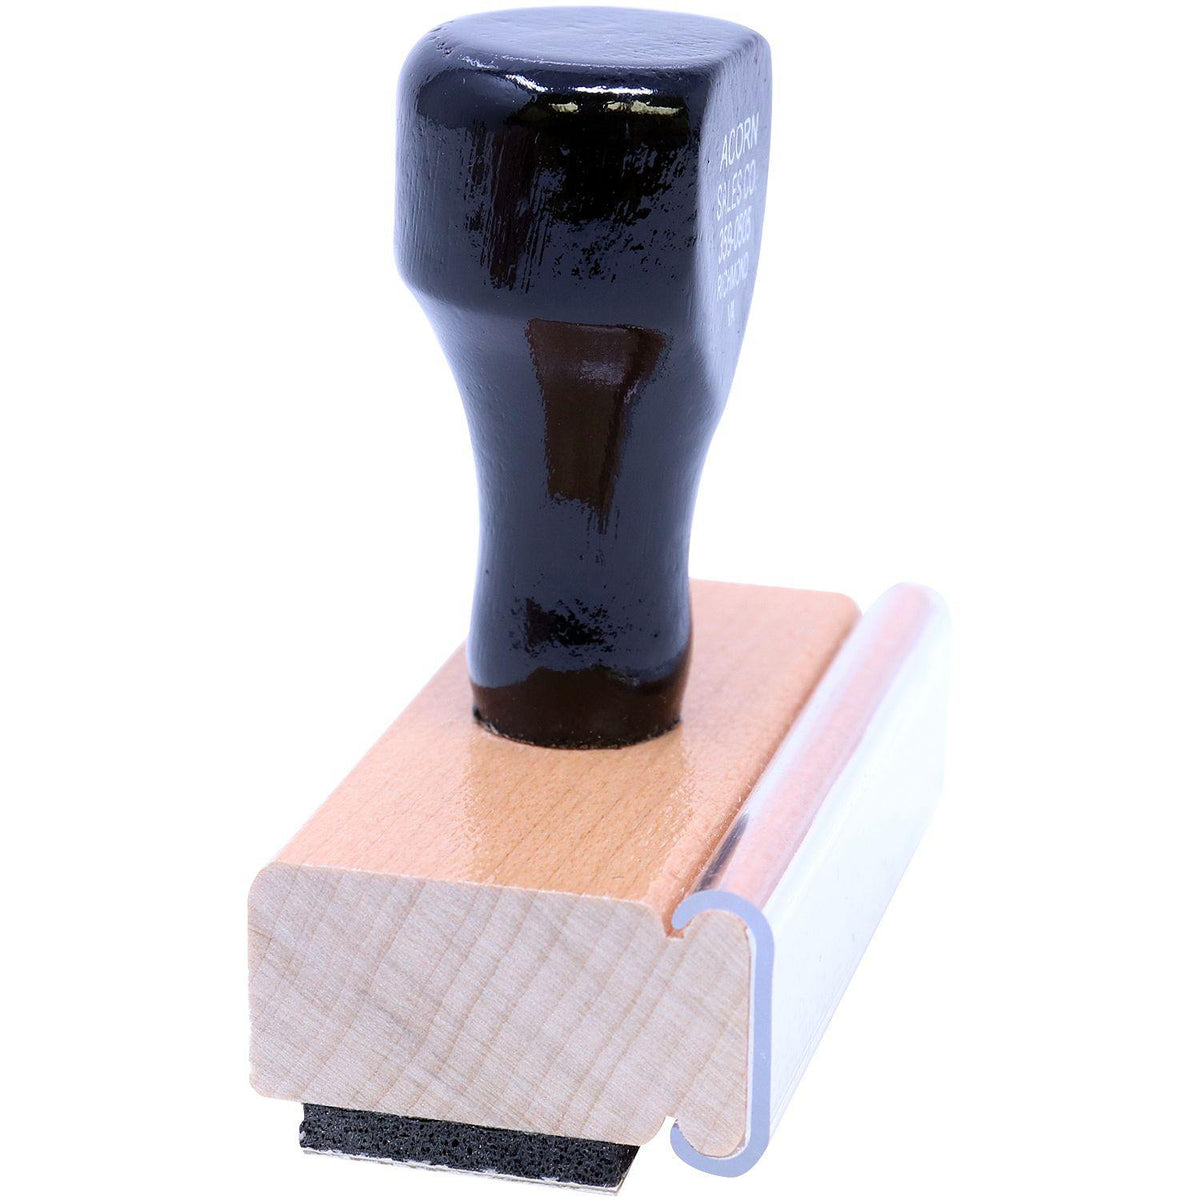 Side View of Large Managed Care Rubber Stamp at an Angle